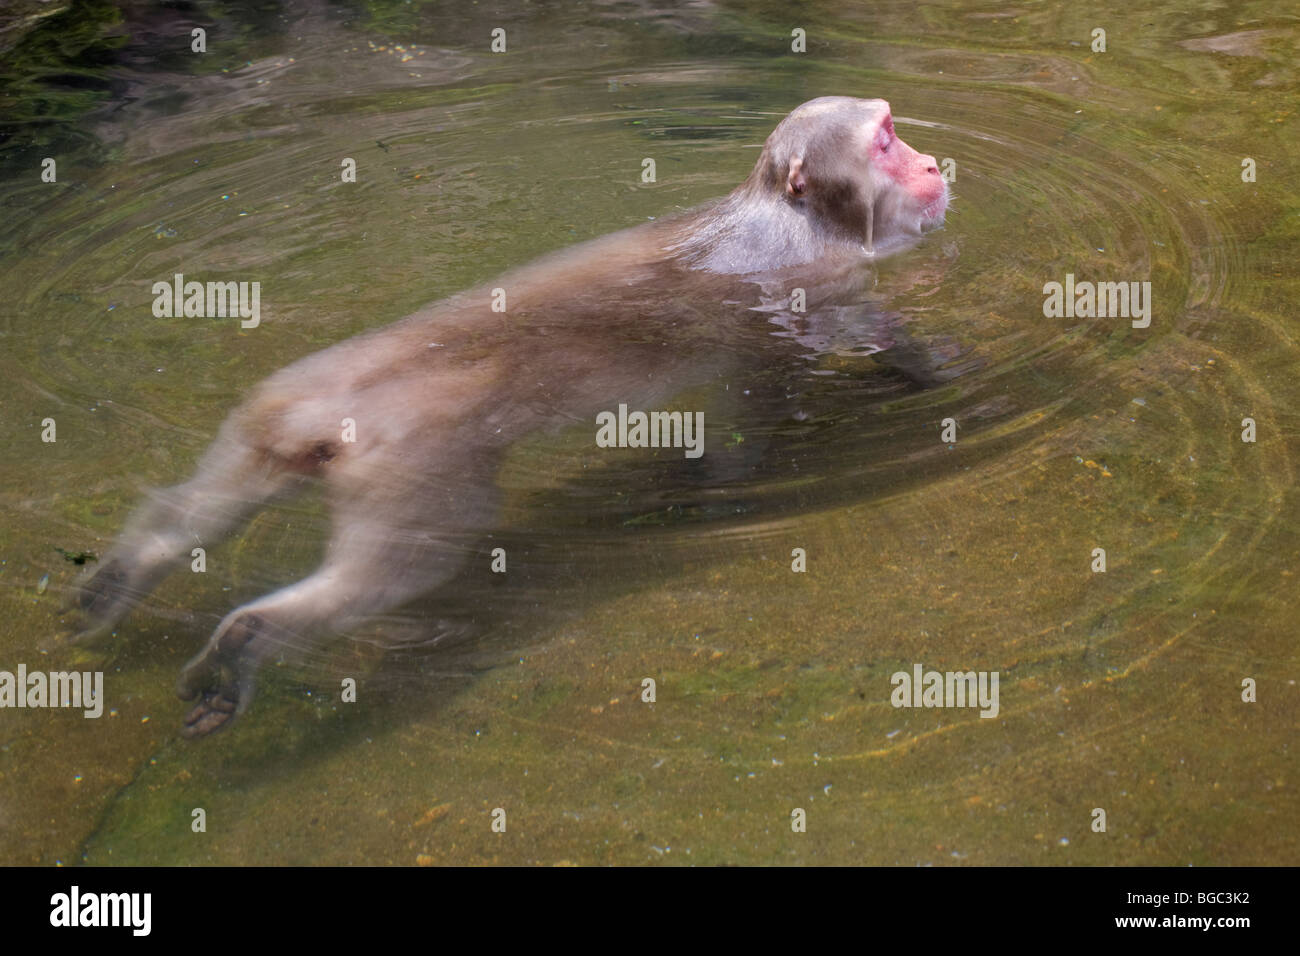 Japanese Macaque (Macaca fuscata) swimming in water of hot spring pool in Nagano Prefecture on Honshu Island, Japan Stock Photo